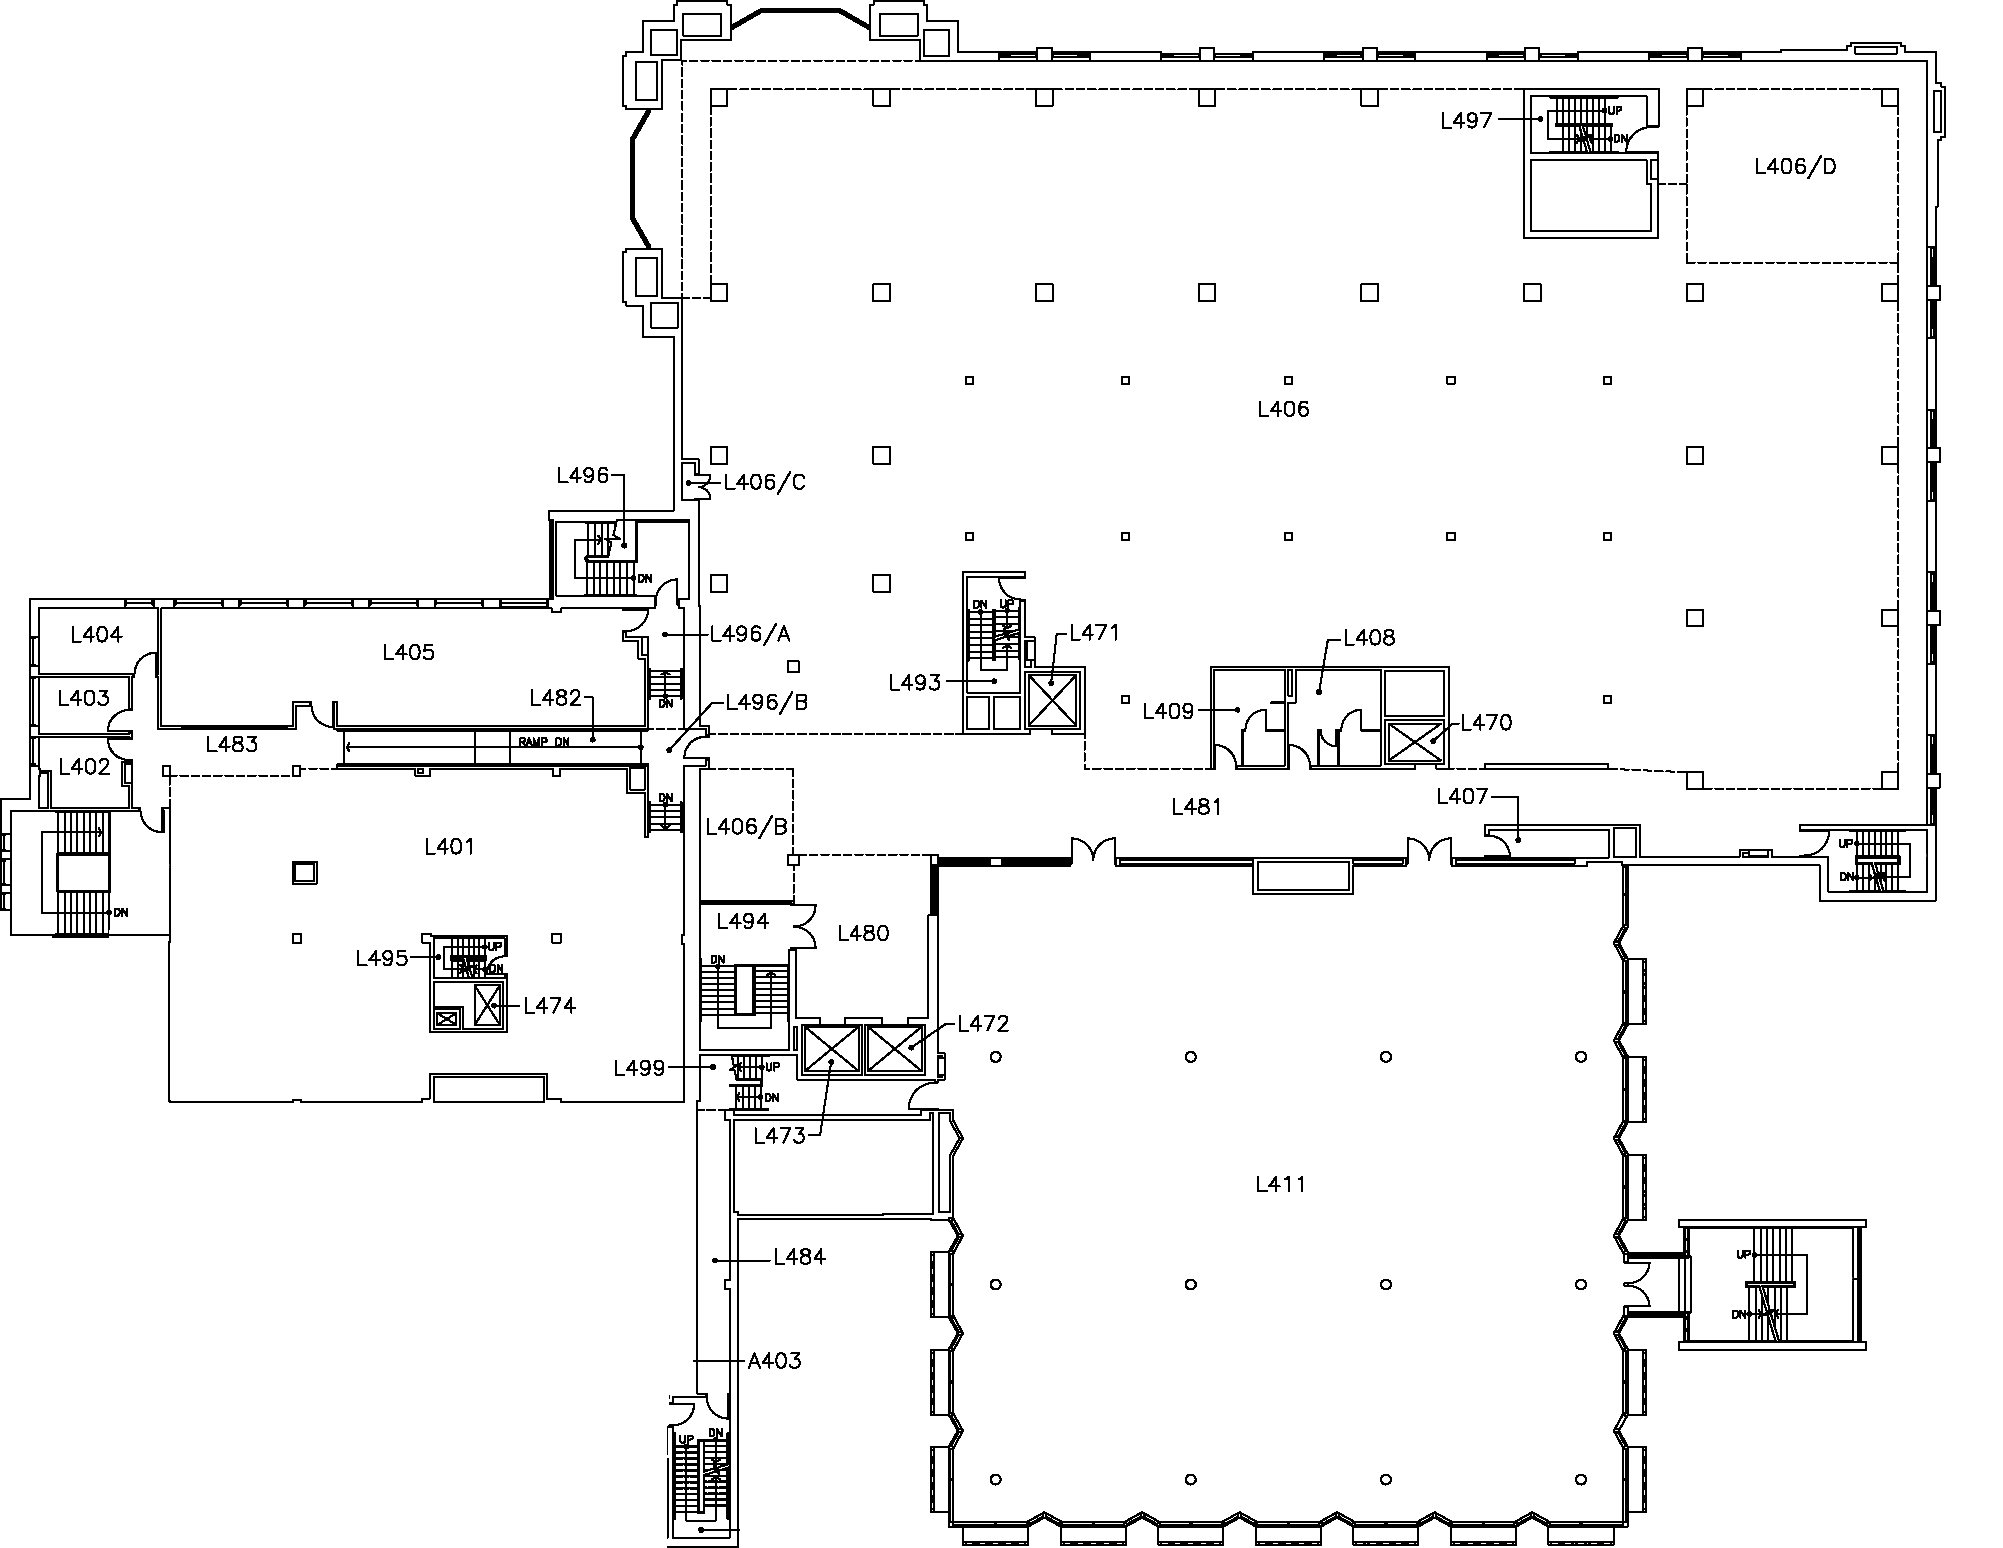 Mills Library - Fourth Floor Map